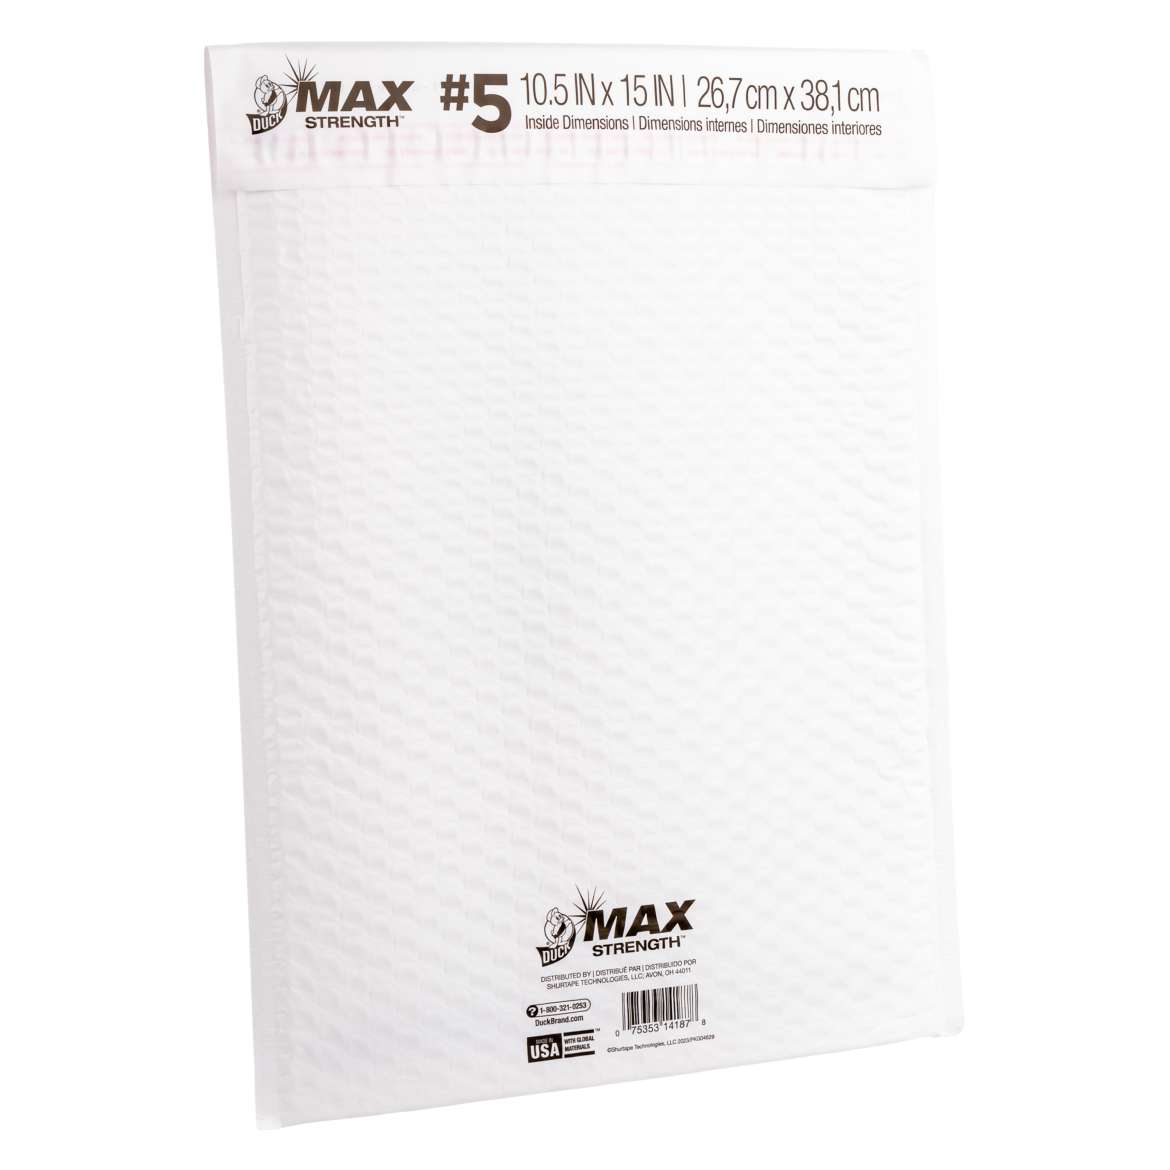 Duck® Brand Poly Bubble Mailers